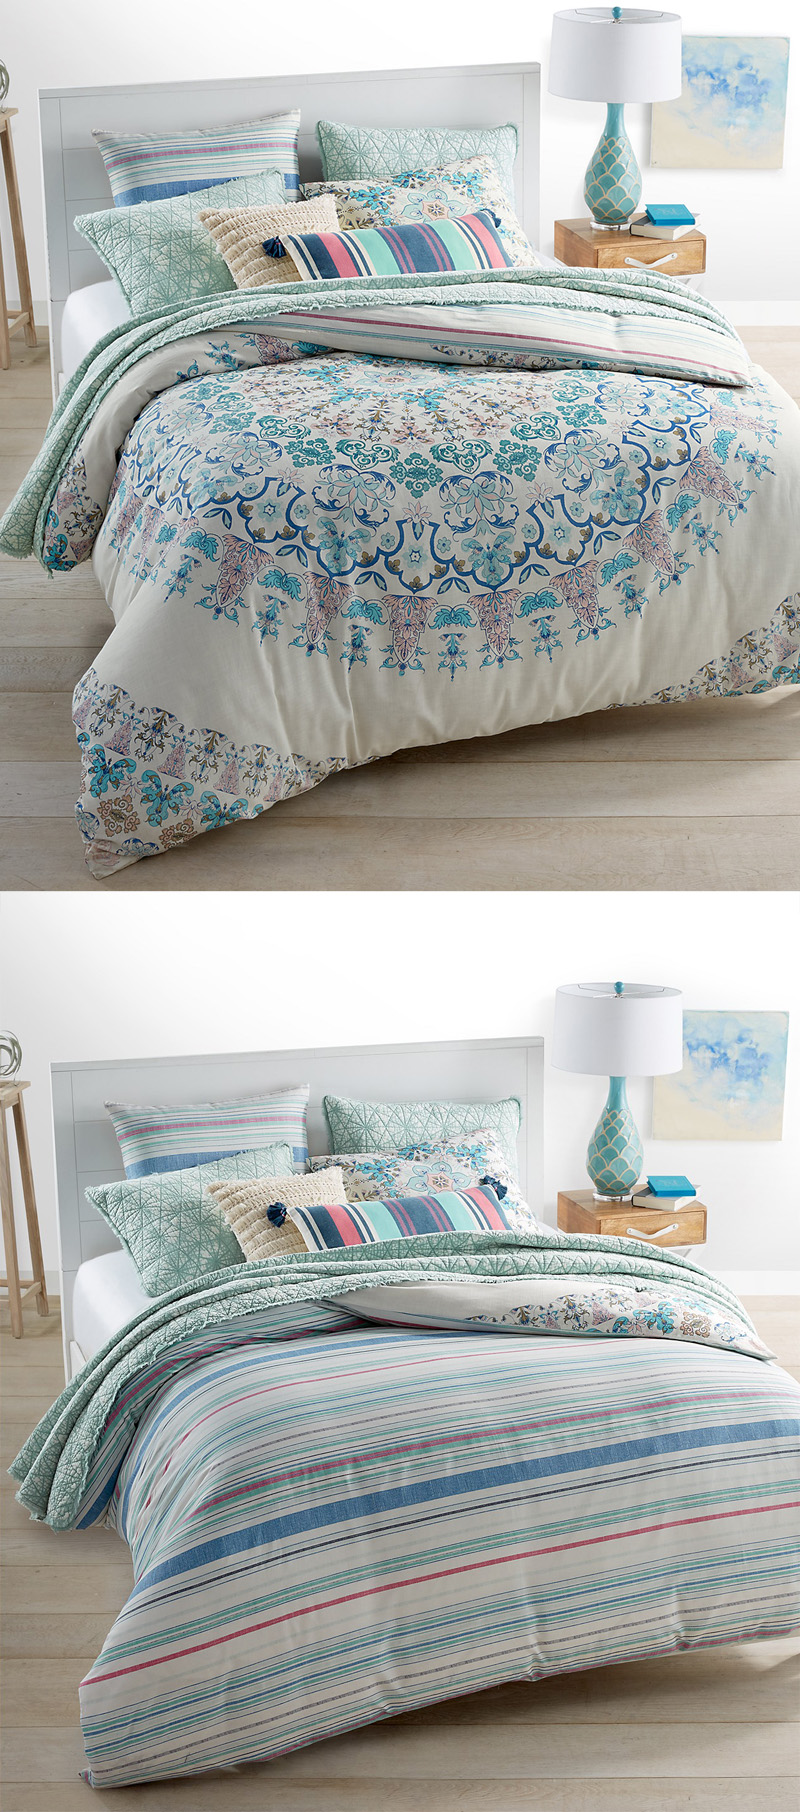 Full Moon Reversible Bedding Collection